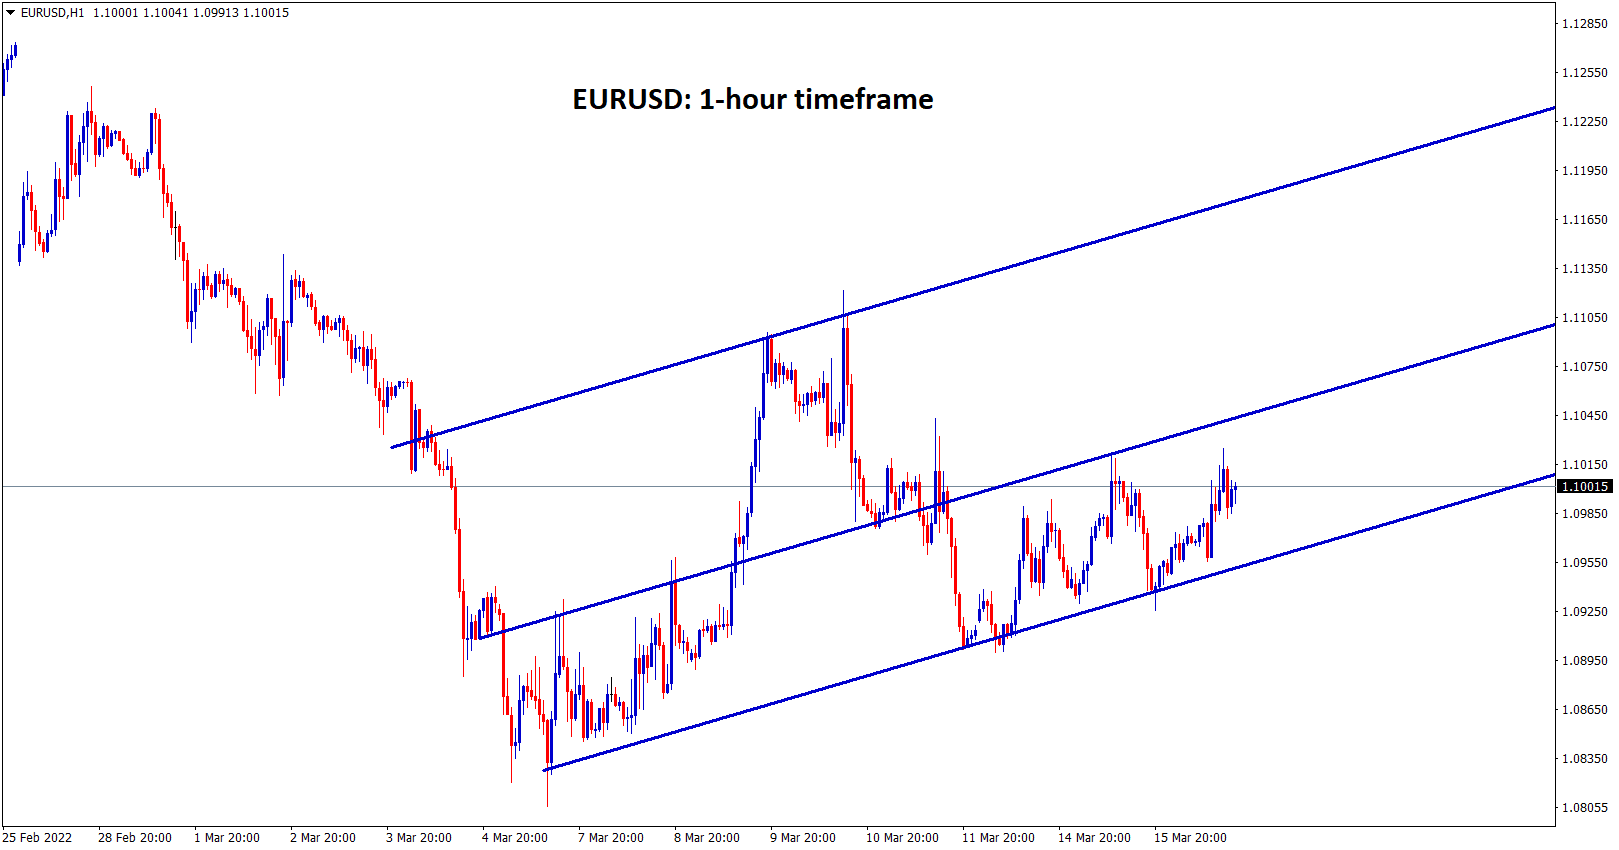 EURUSD moving in an Ascending channel range